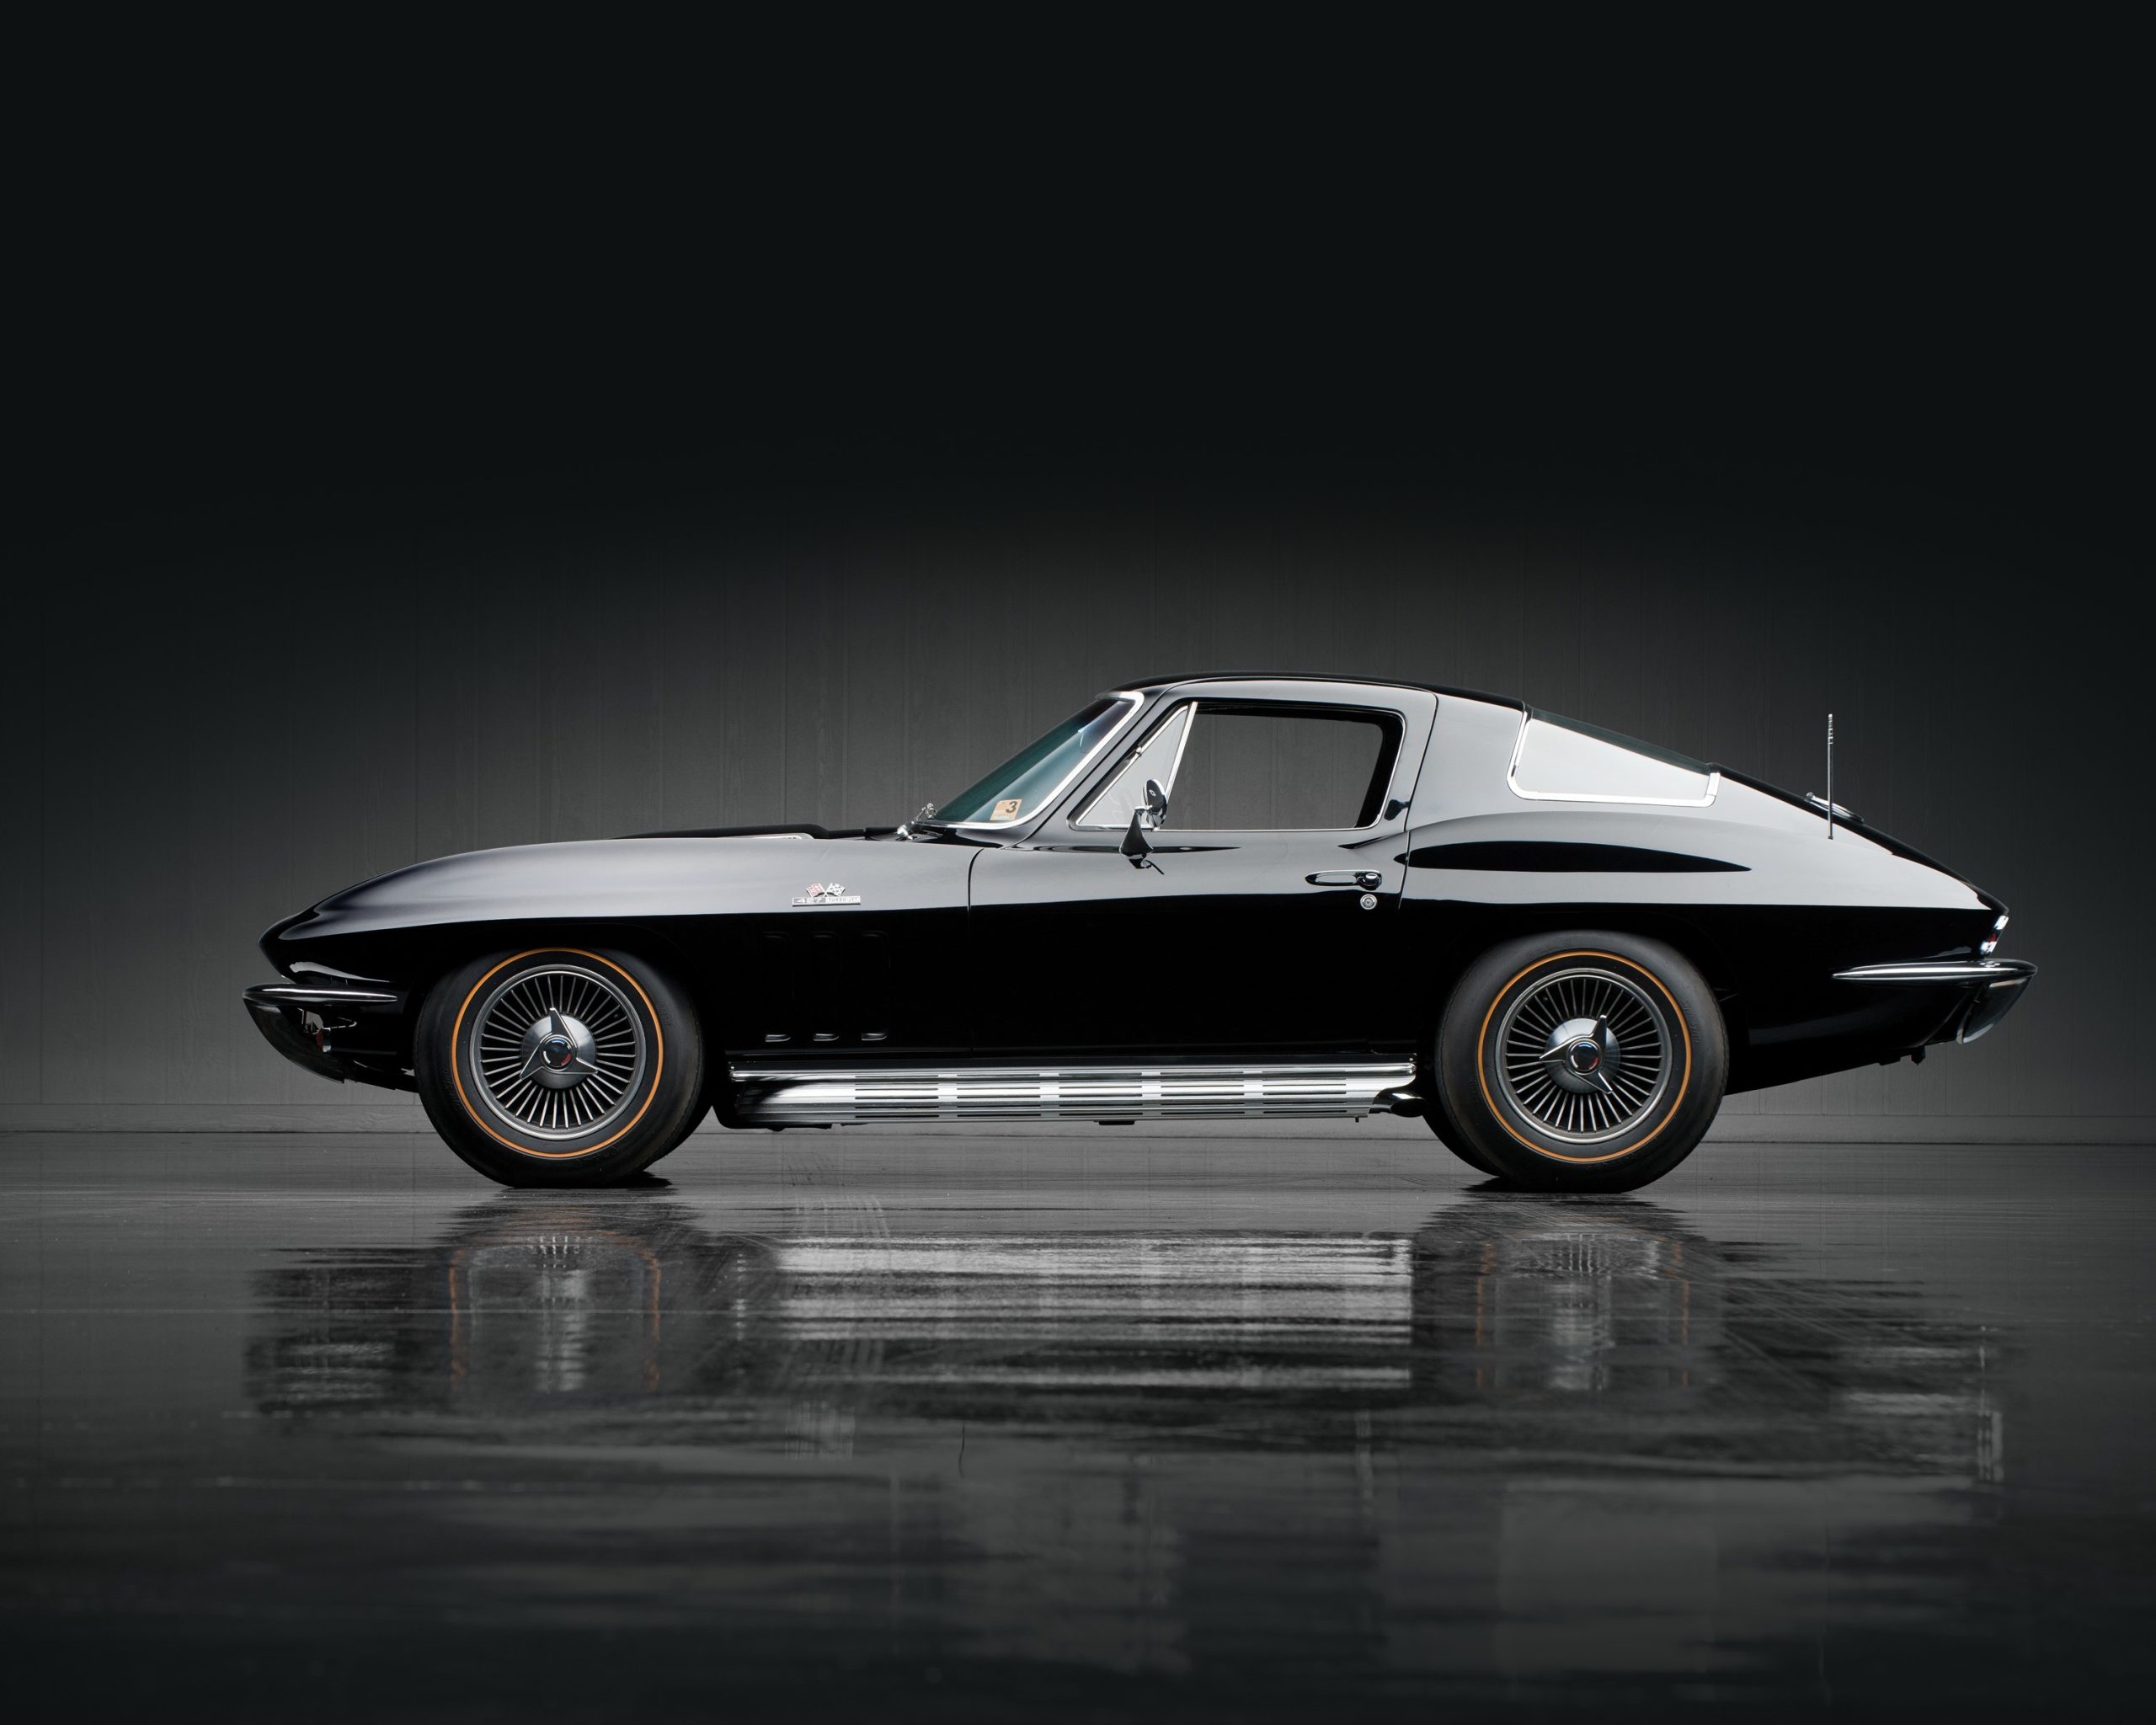 1966 Chevrolet Corvette Sting Ray 427/425 Coupe Darin Schnabel ©2013 Courtesy of RM Auctions